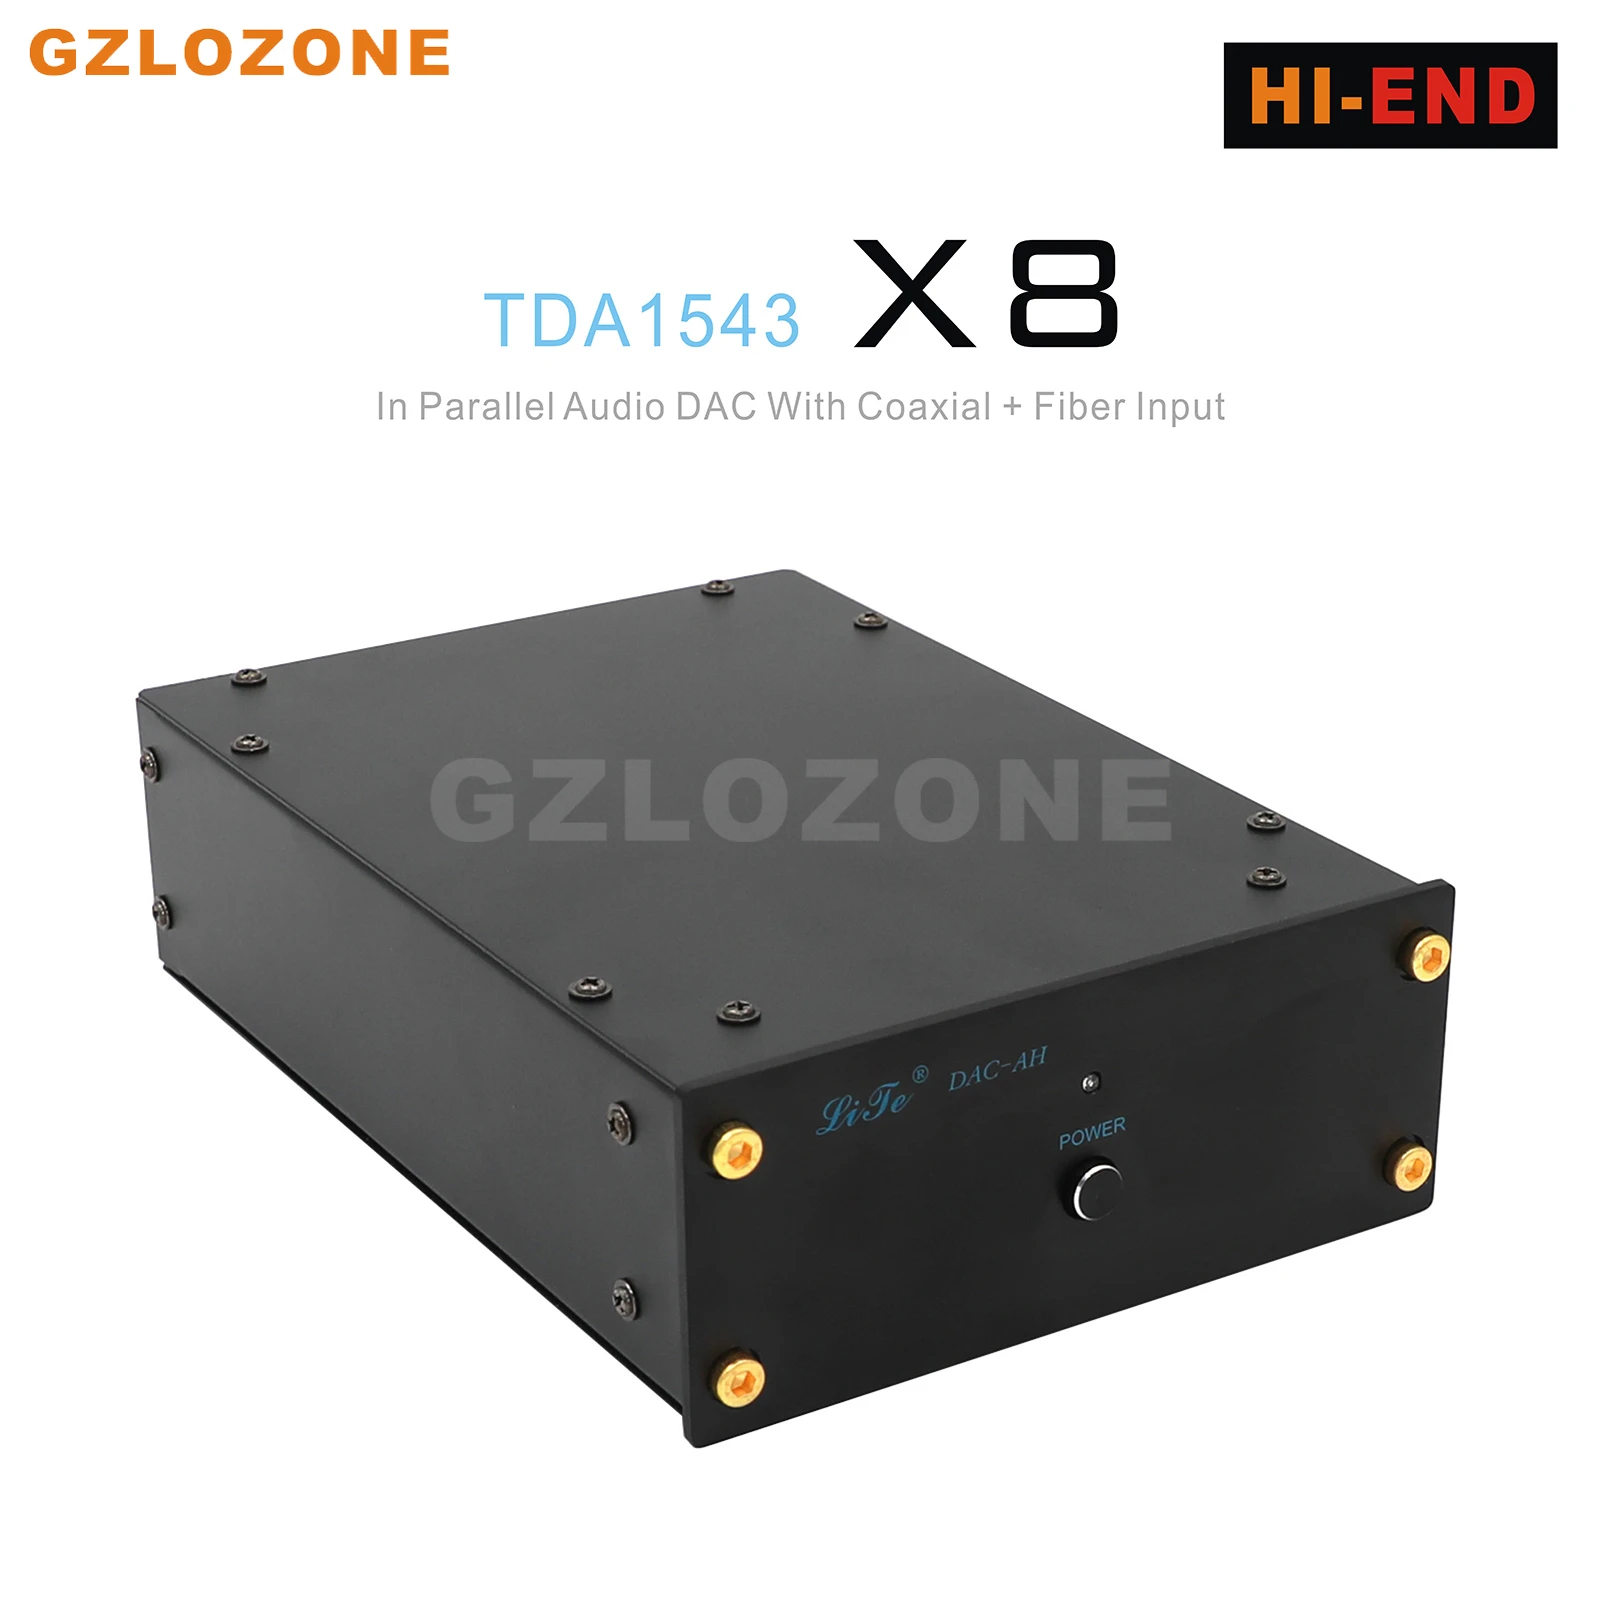 

HI-END TDA1543 X8 decoder In Parallel Audio DAC With RCA Coaxial and Fiber optic plug input